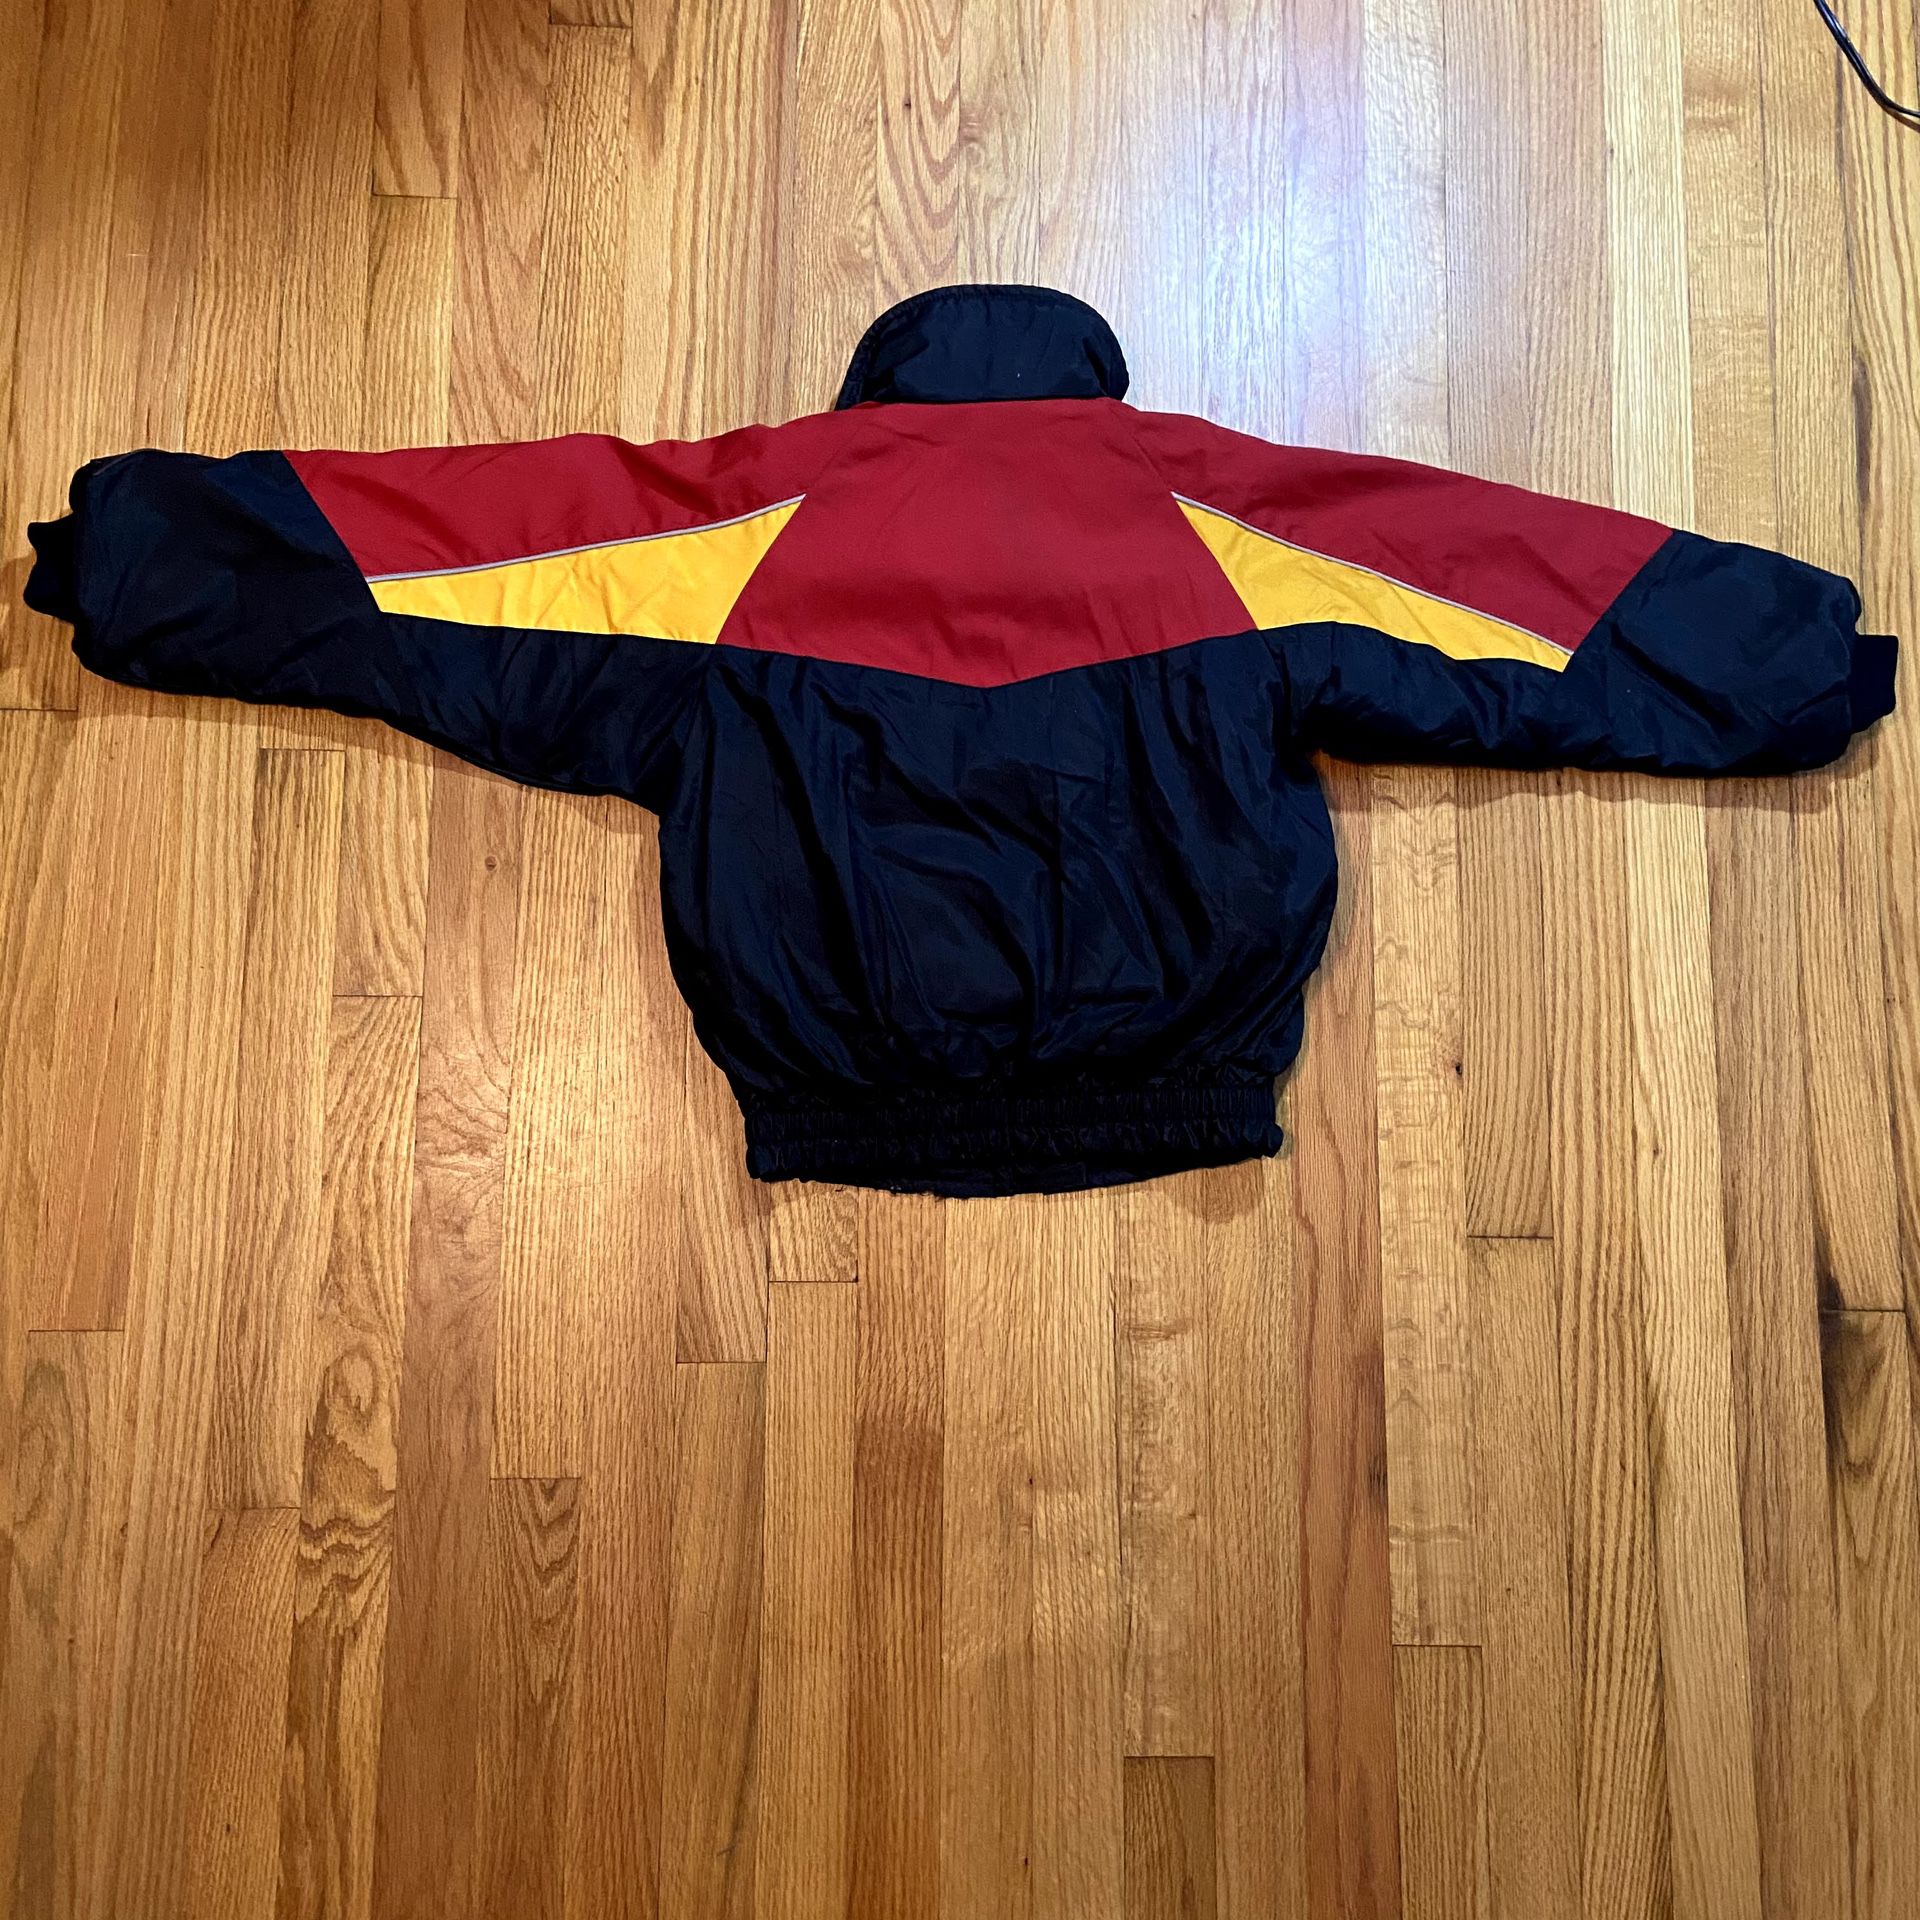 Vintage Ice Rider By Mustang Youth Kids Medium Snowmobile Jacket Coat - Padded